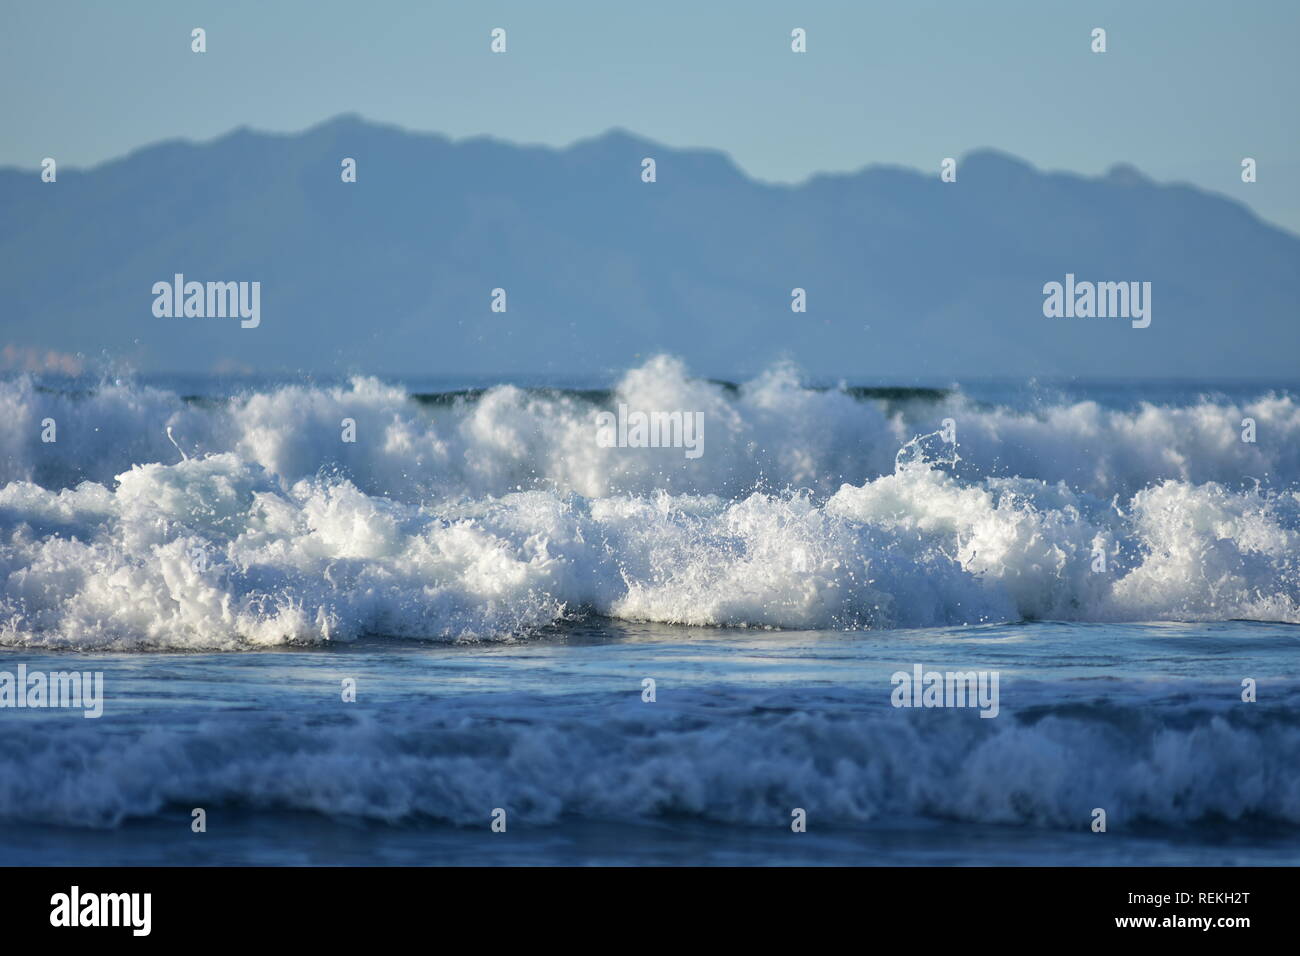 White foam of oceanic surf rolling towards camera with large landmass in distant background. Stock Photo